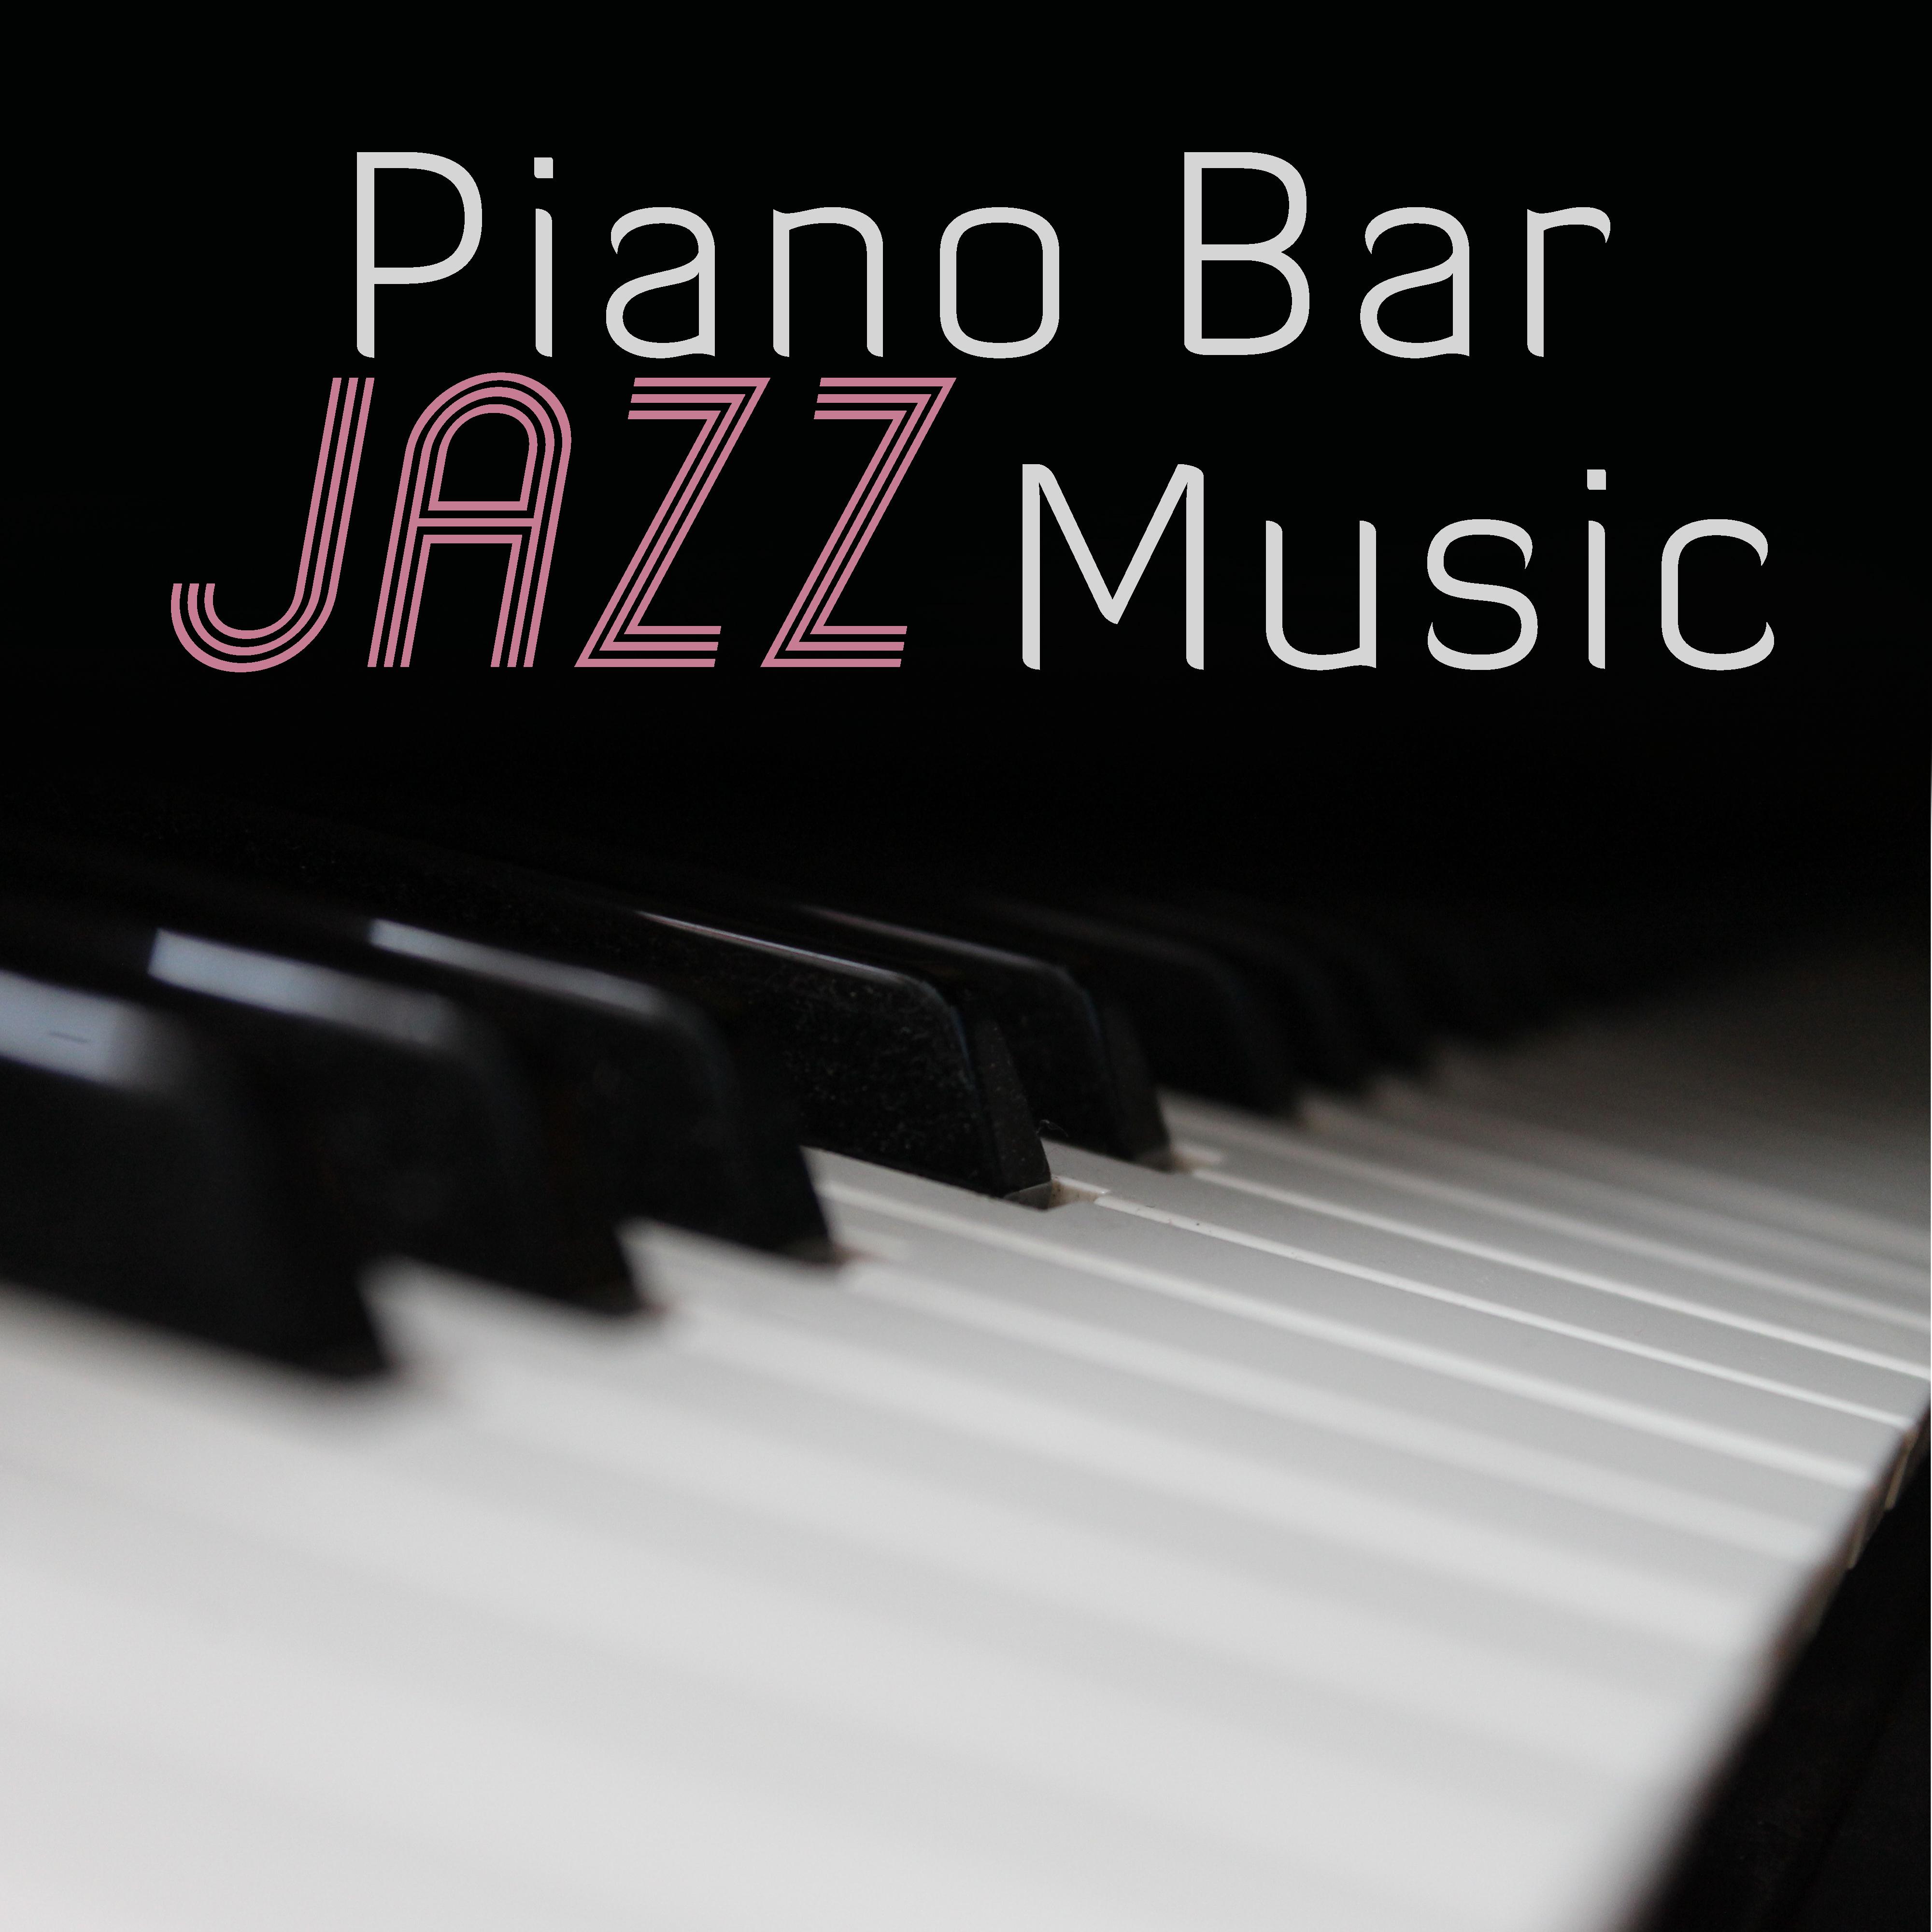 Piano Bar Jazz Music  Smooth Piano Sounds, Moonlight Jazz, Relaxing Melodies